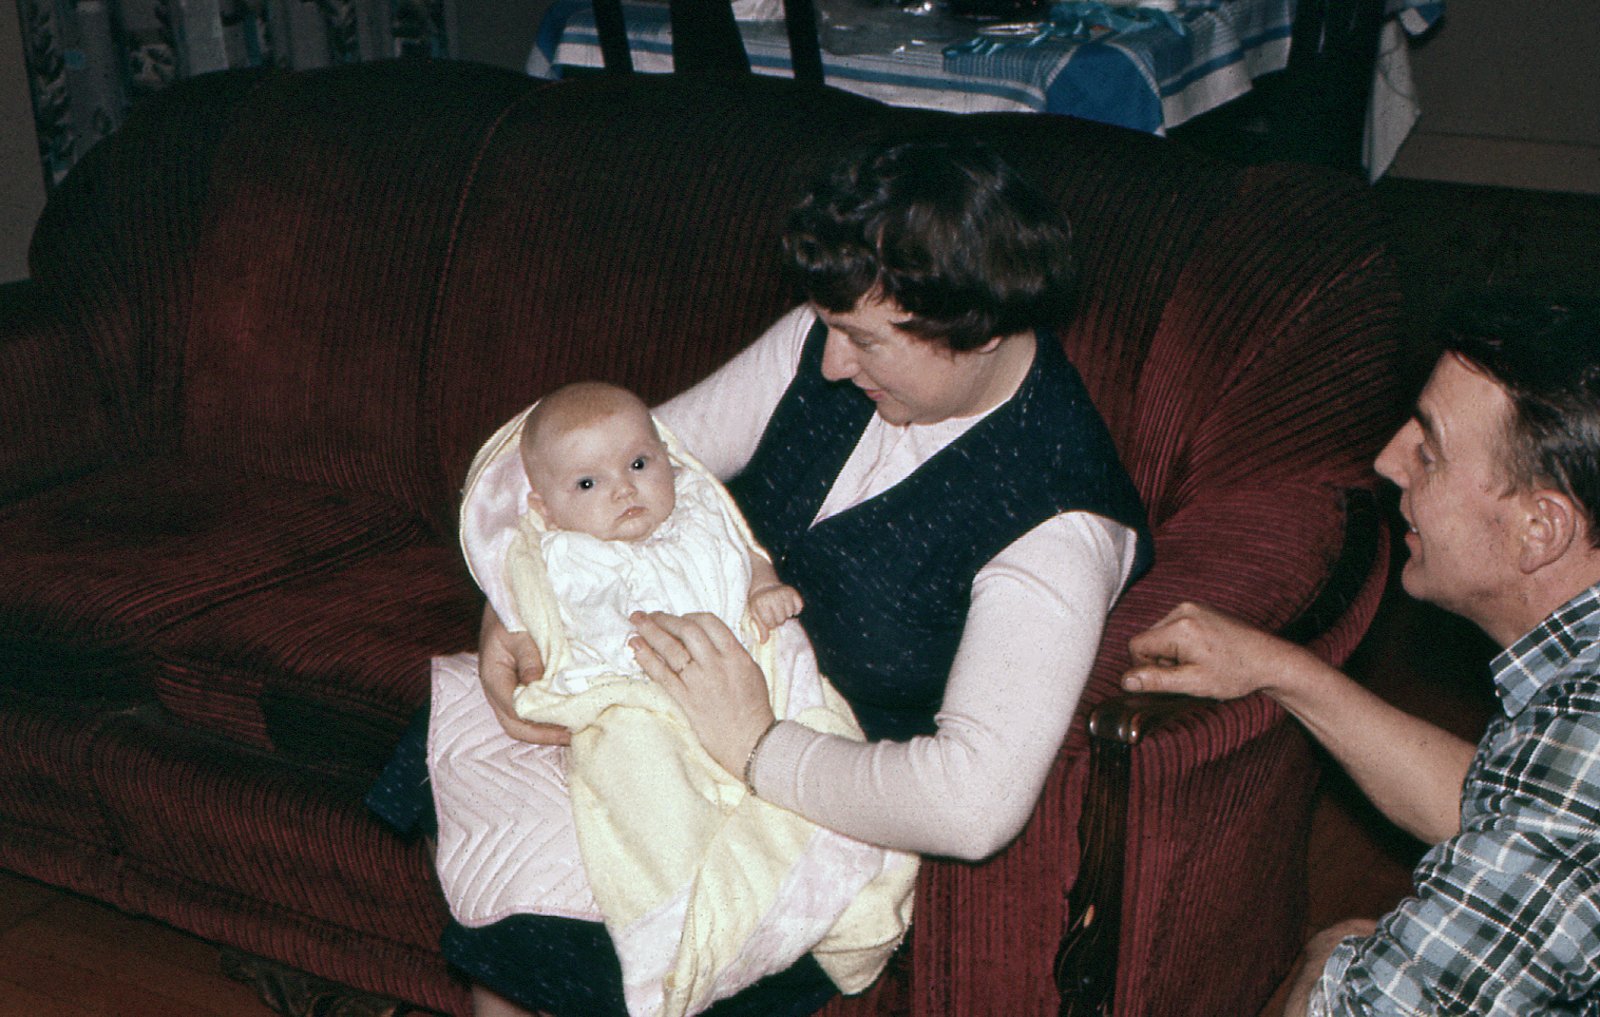 Pam holding first born Maeve, Cecil looking on at the right, Vancouver, 23 October 1959.